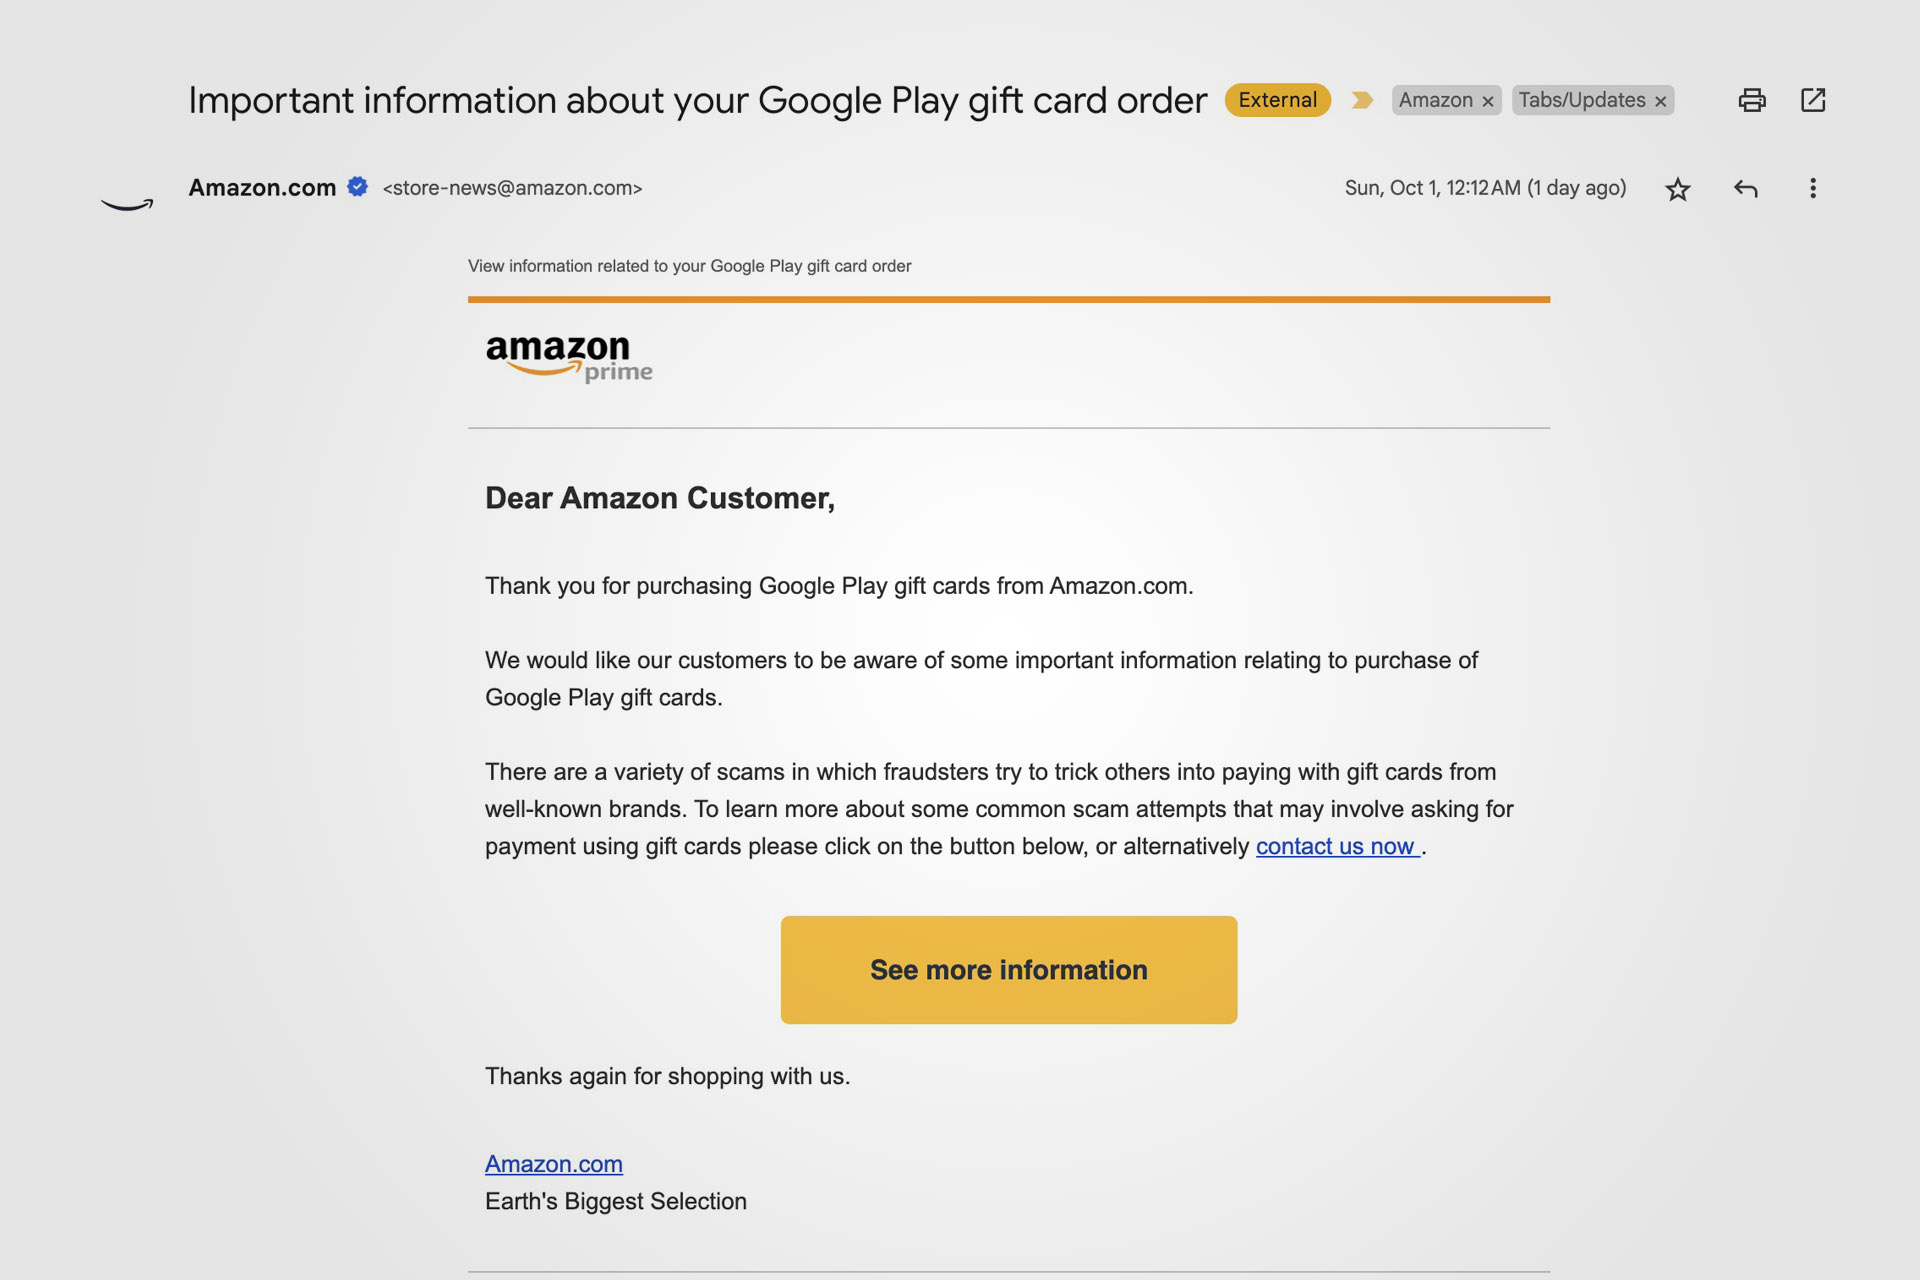 Oops: Important information about your Amazon gift card order